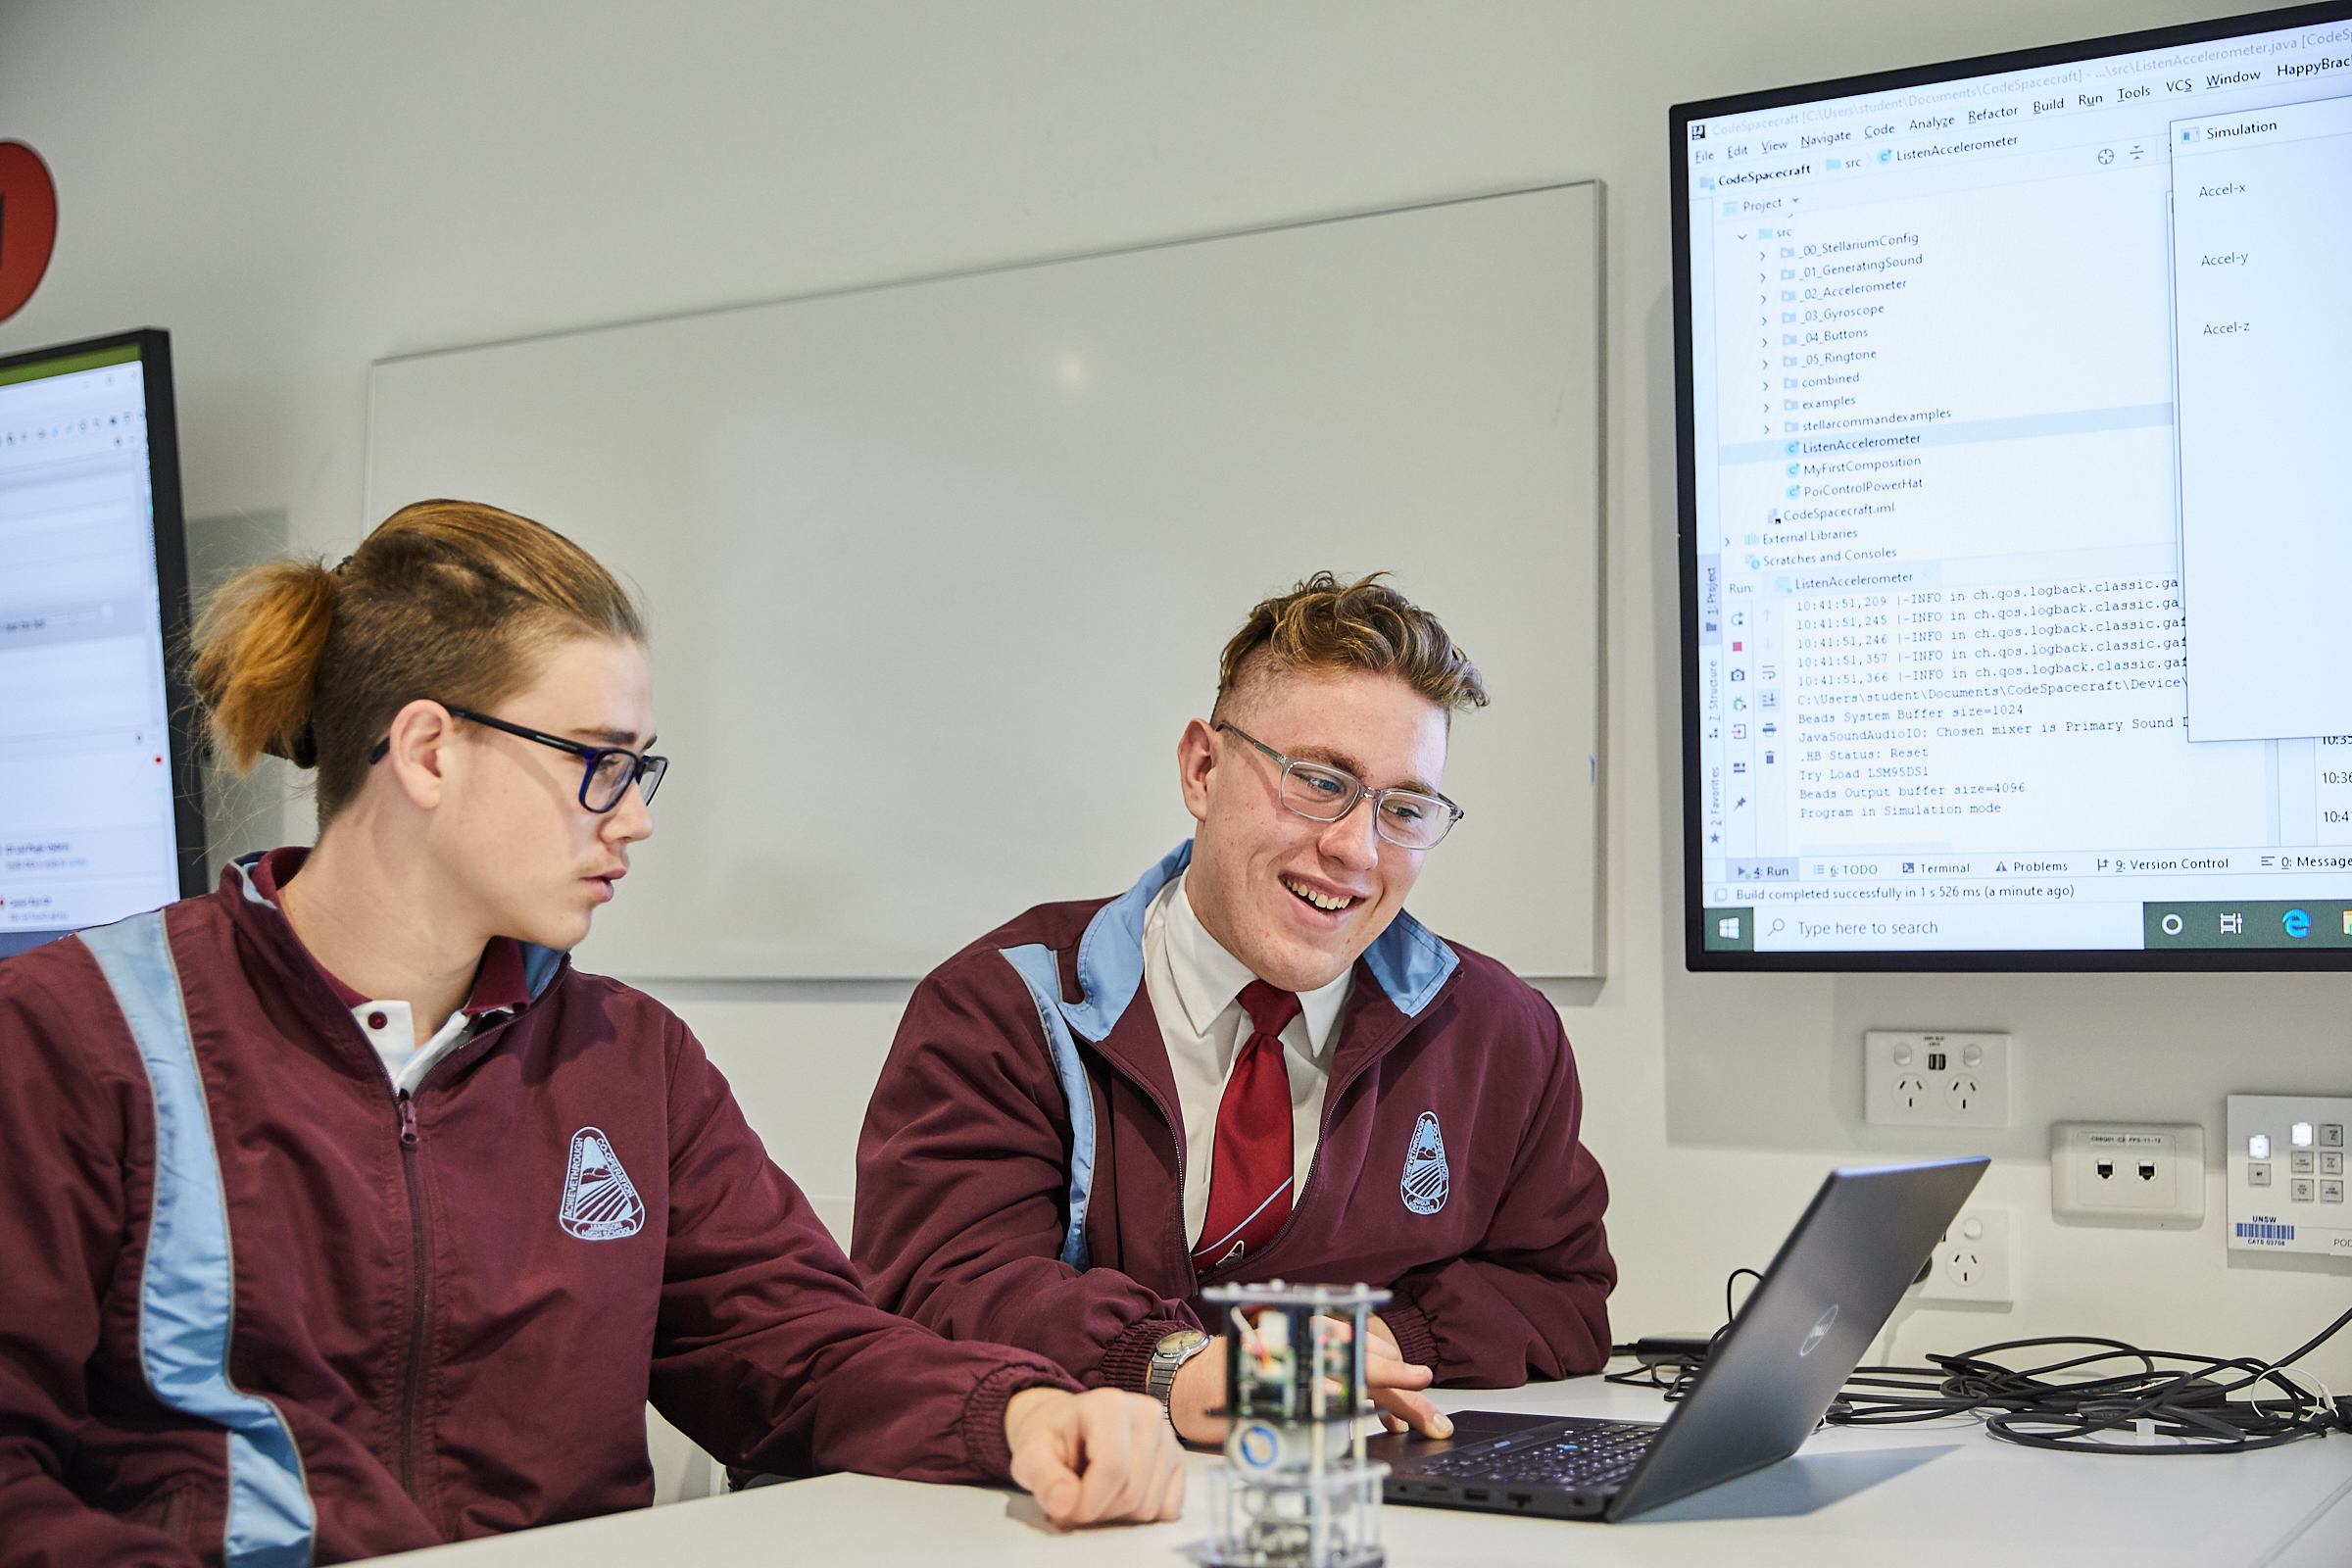 High School students Kobi Hind (left) and Connor Burke (right) experience a creative coding workshop as part of National Science Week